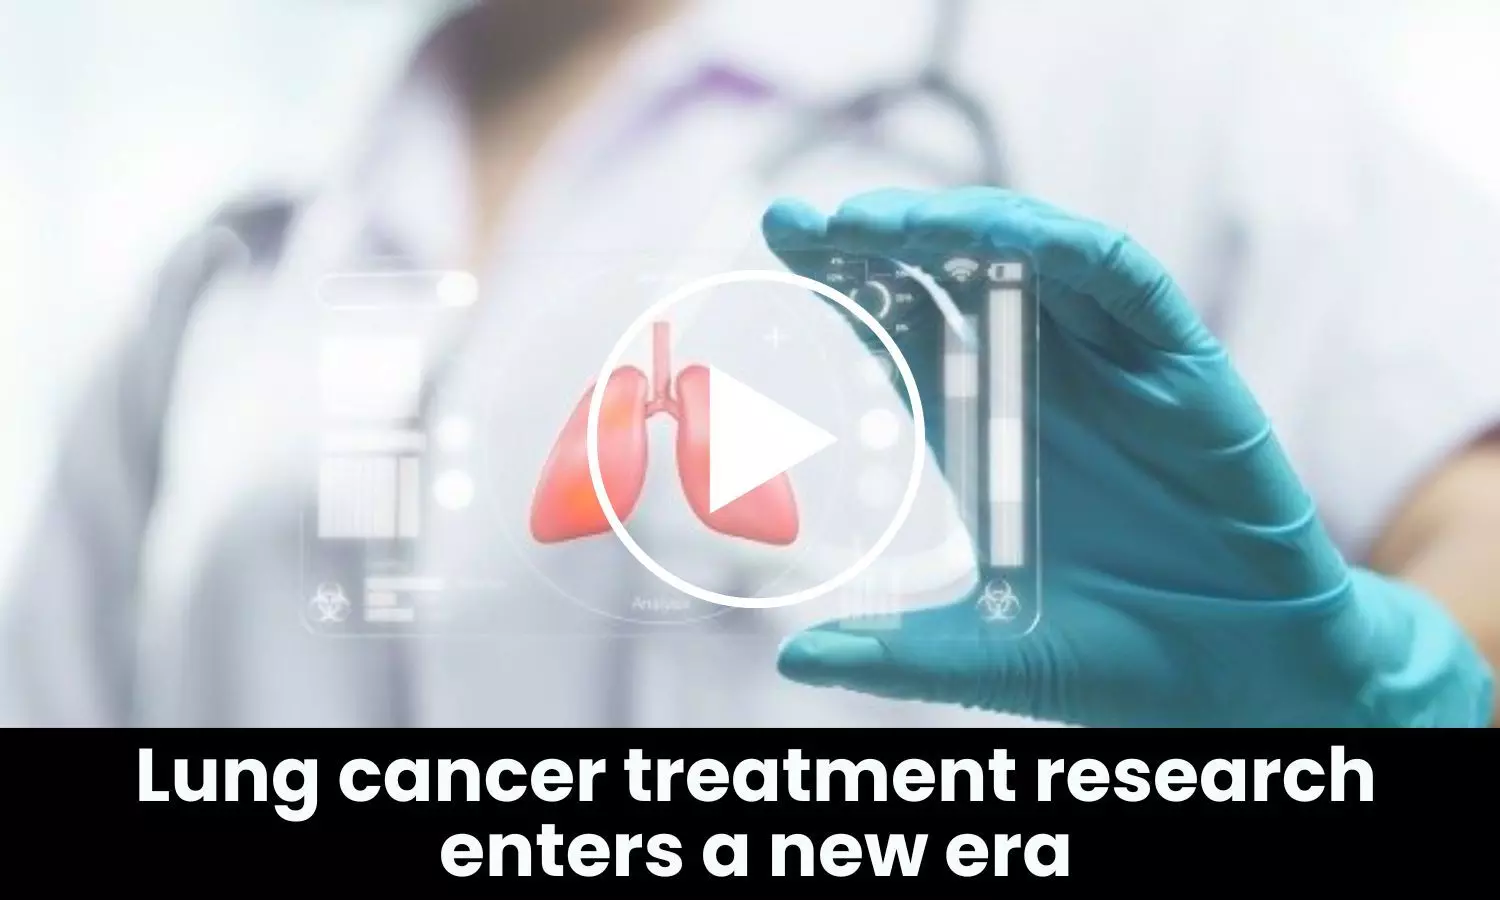 Lung cancer treatment research enters a new era